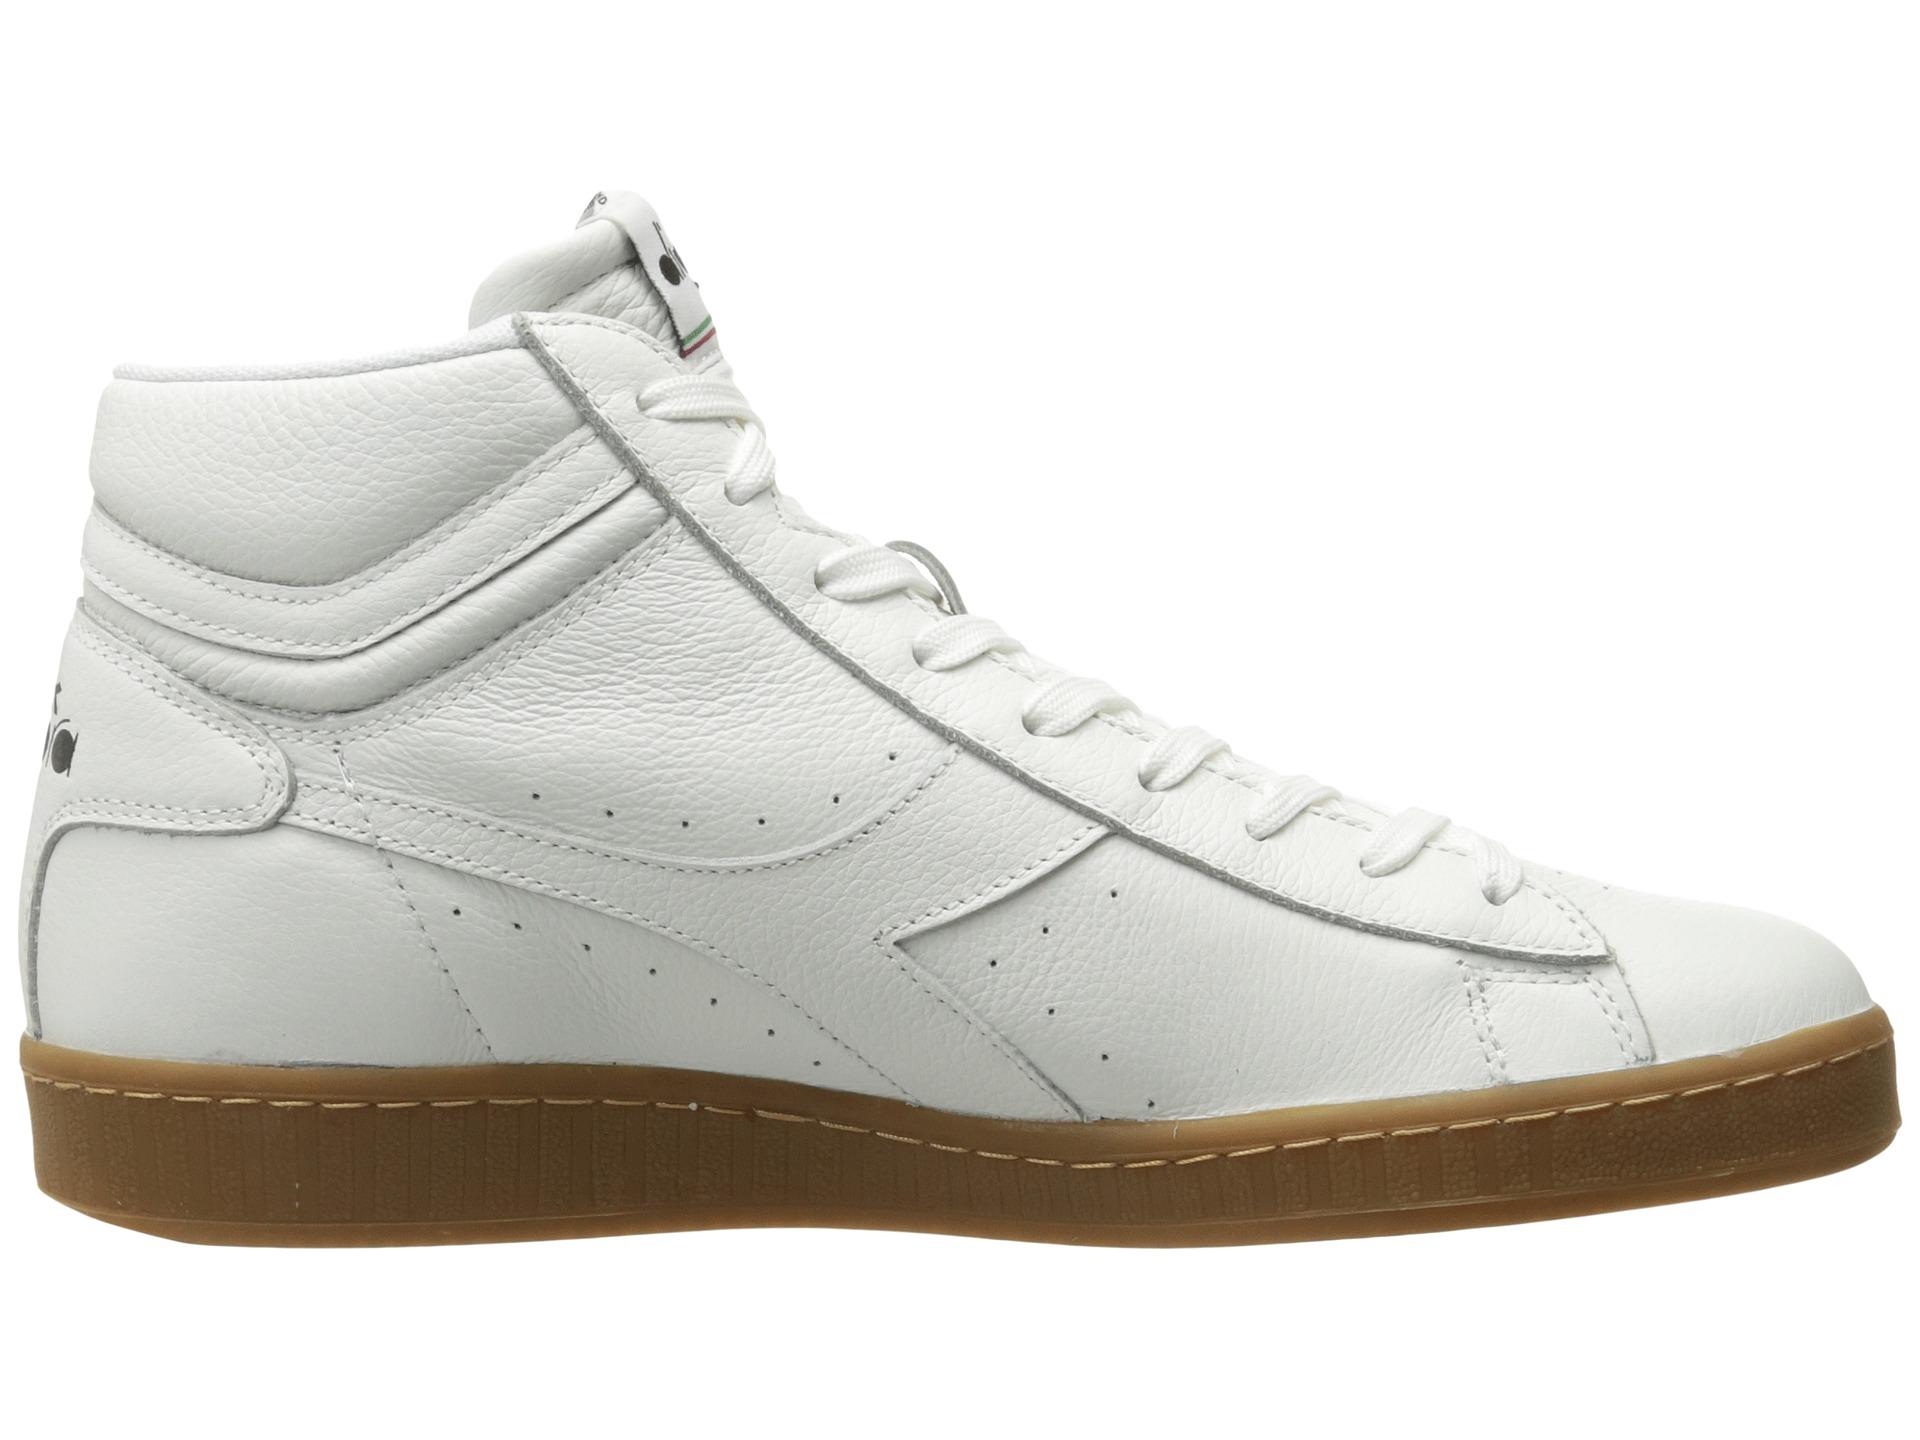 Diadora Leather Game L High Waxed in White for Men - Lyst